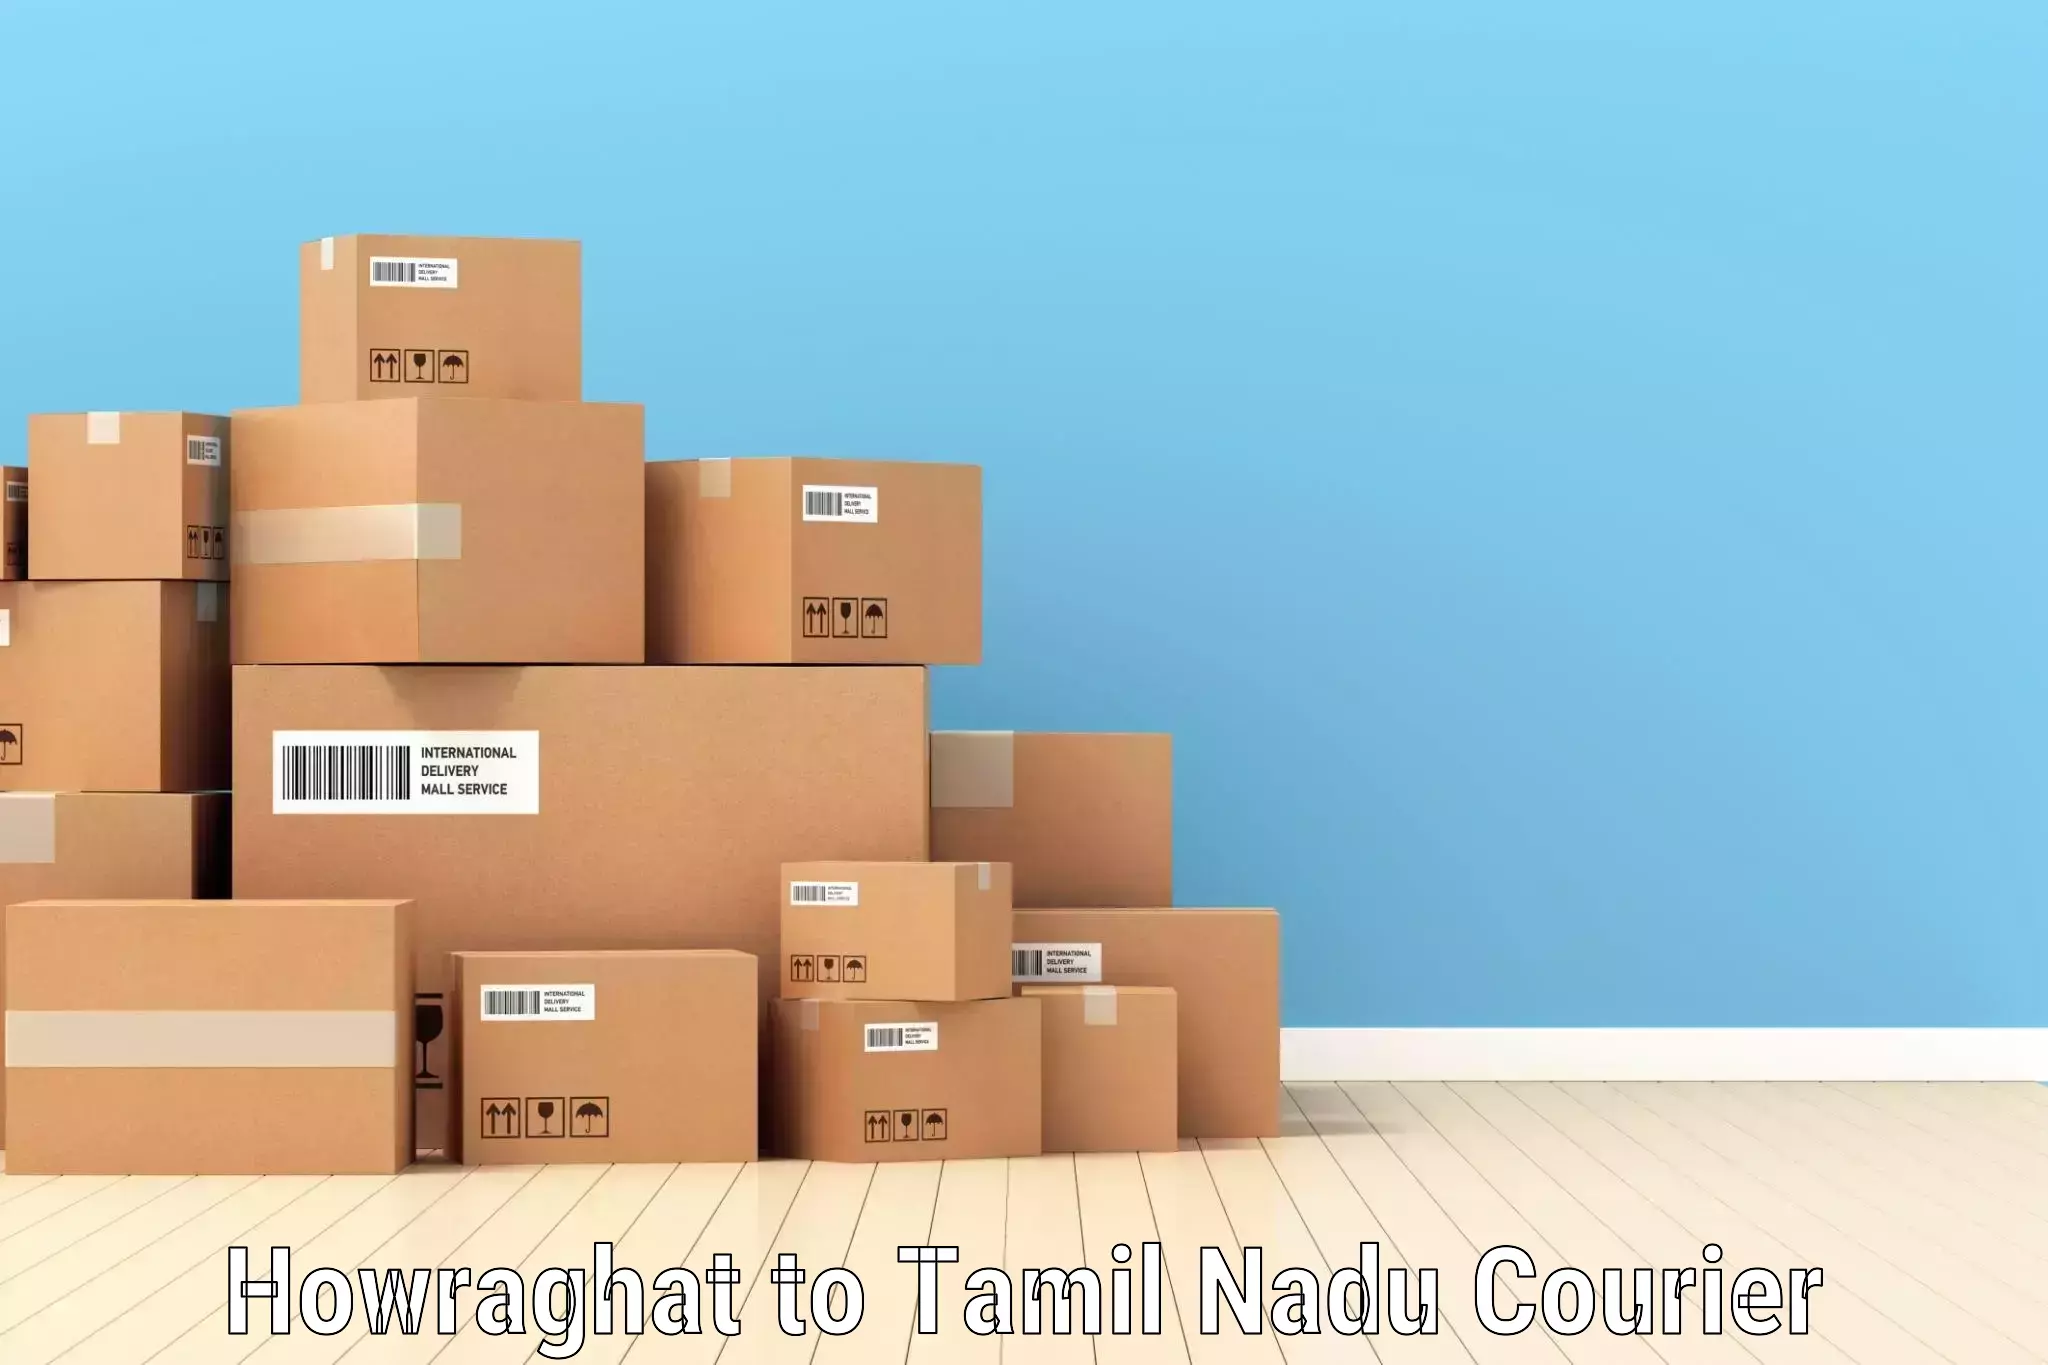 Professional parcel services Howraghat to Thiruthuraipoondi